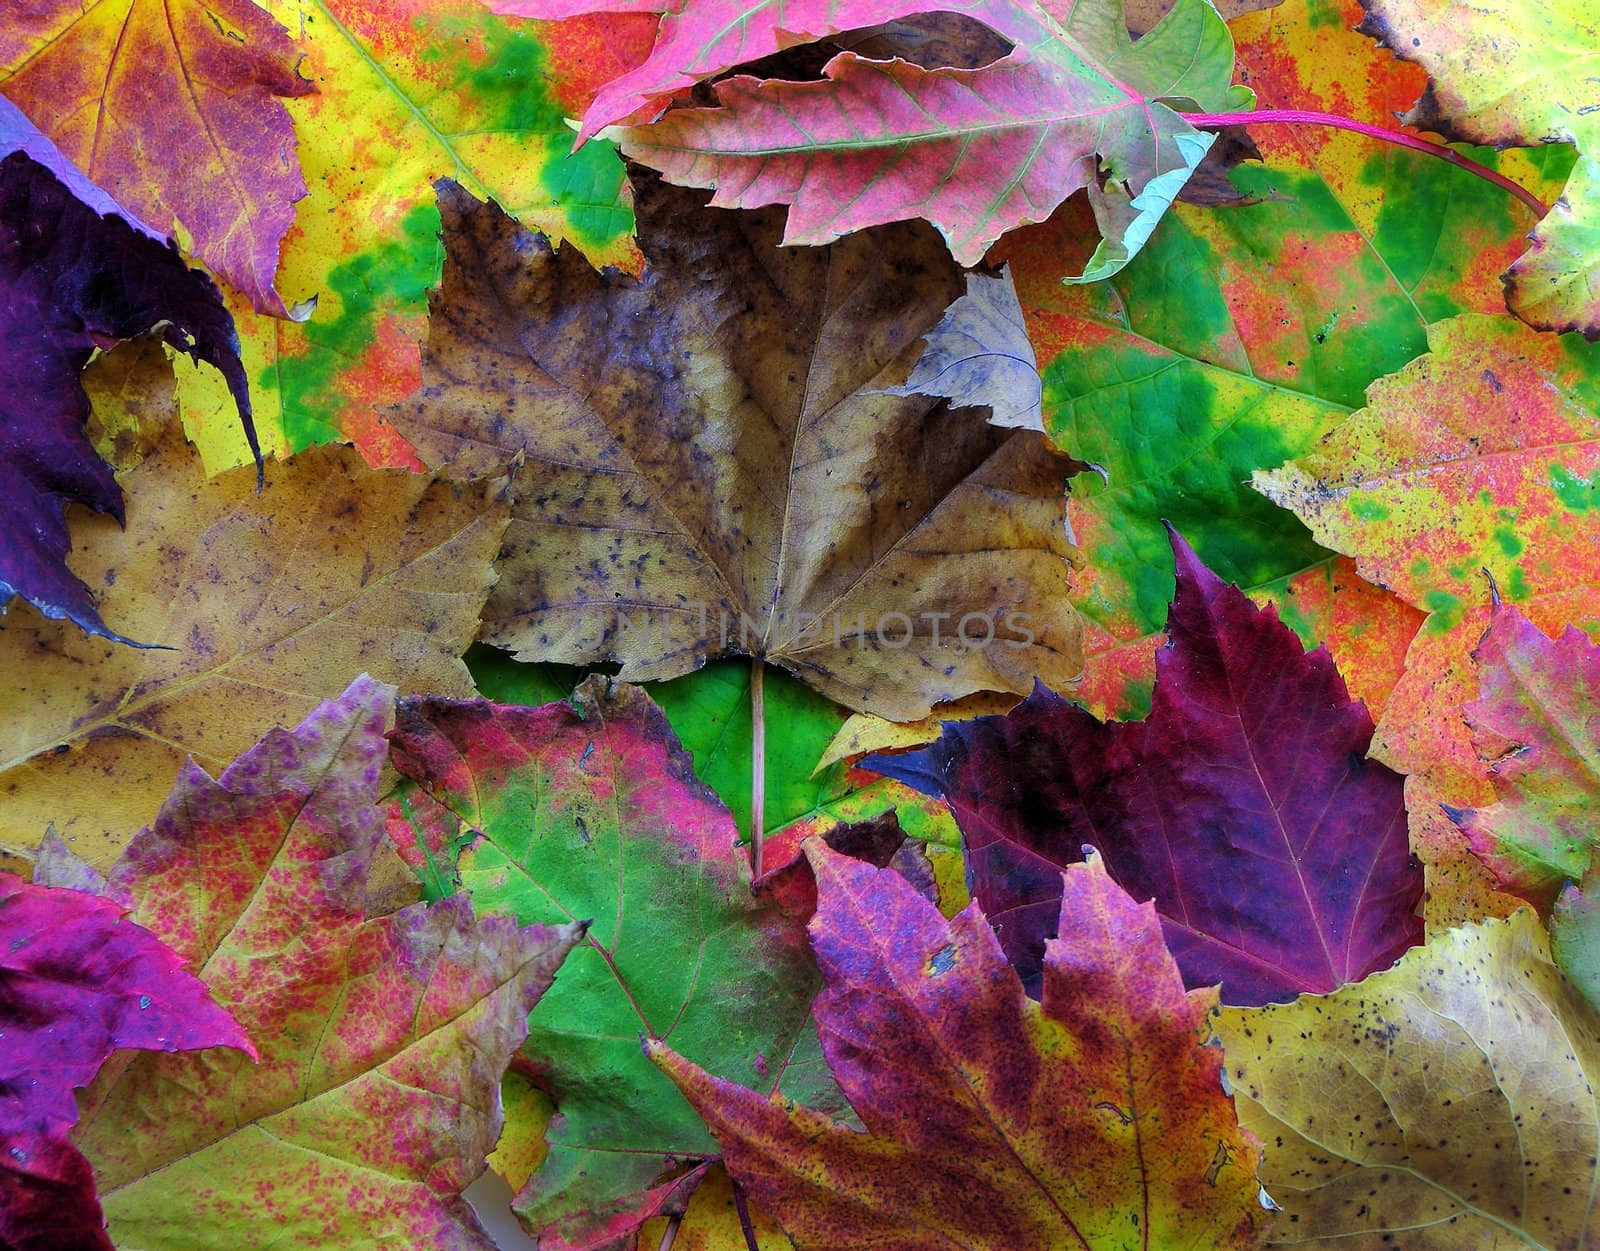 Autumn leaves of multiple colors